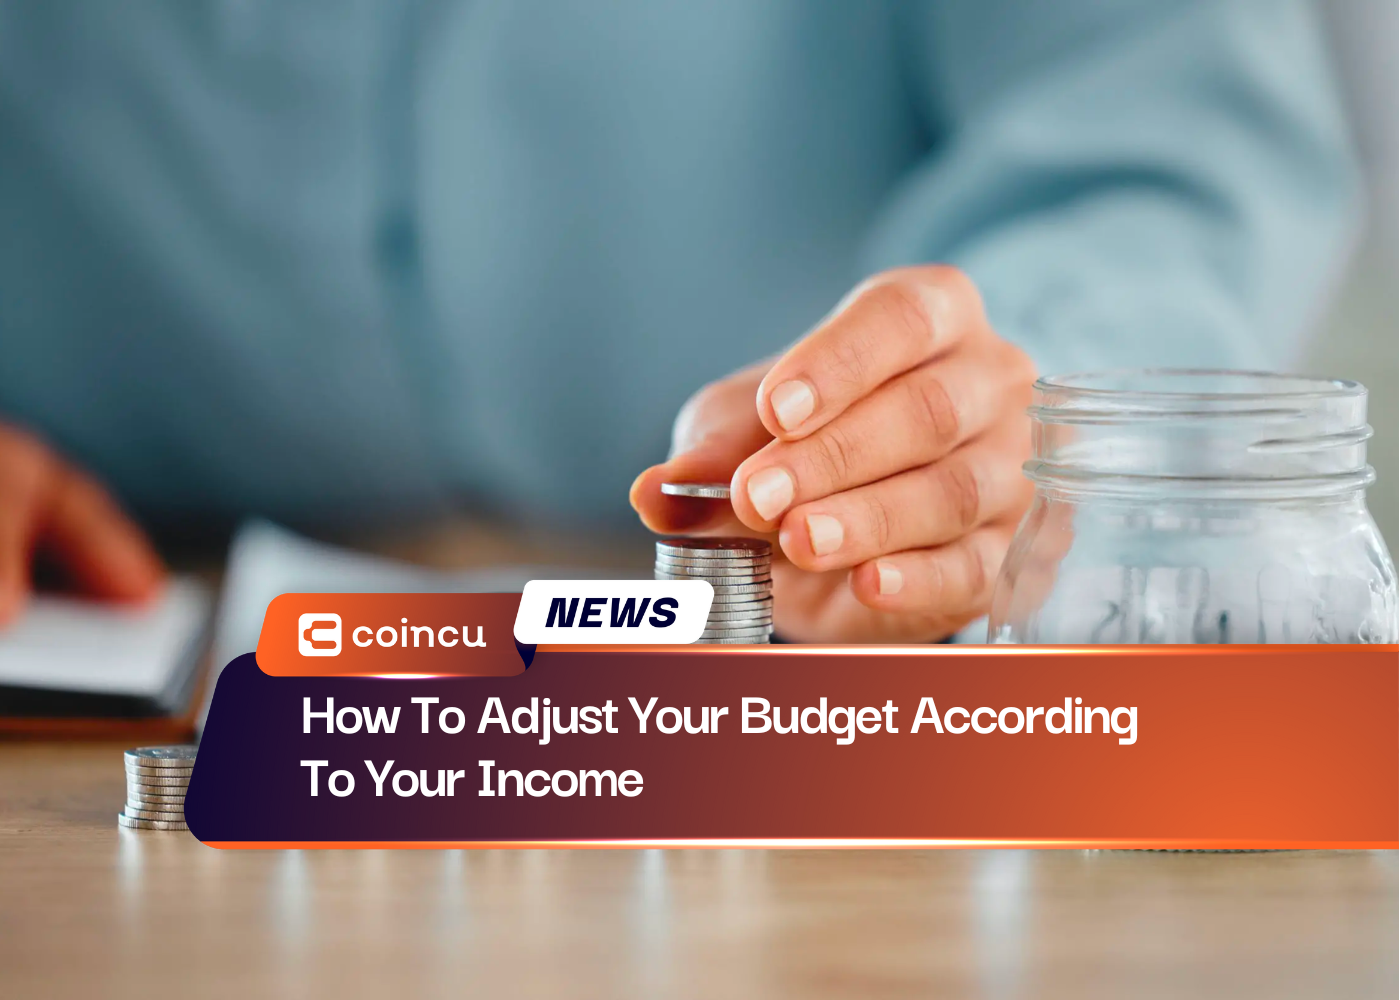 How To Adjust Your Budget According To Your Income